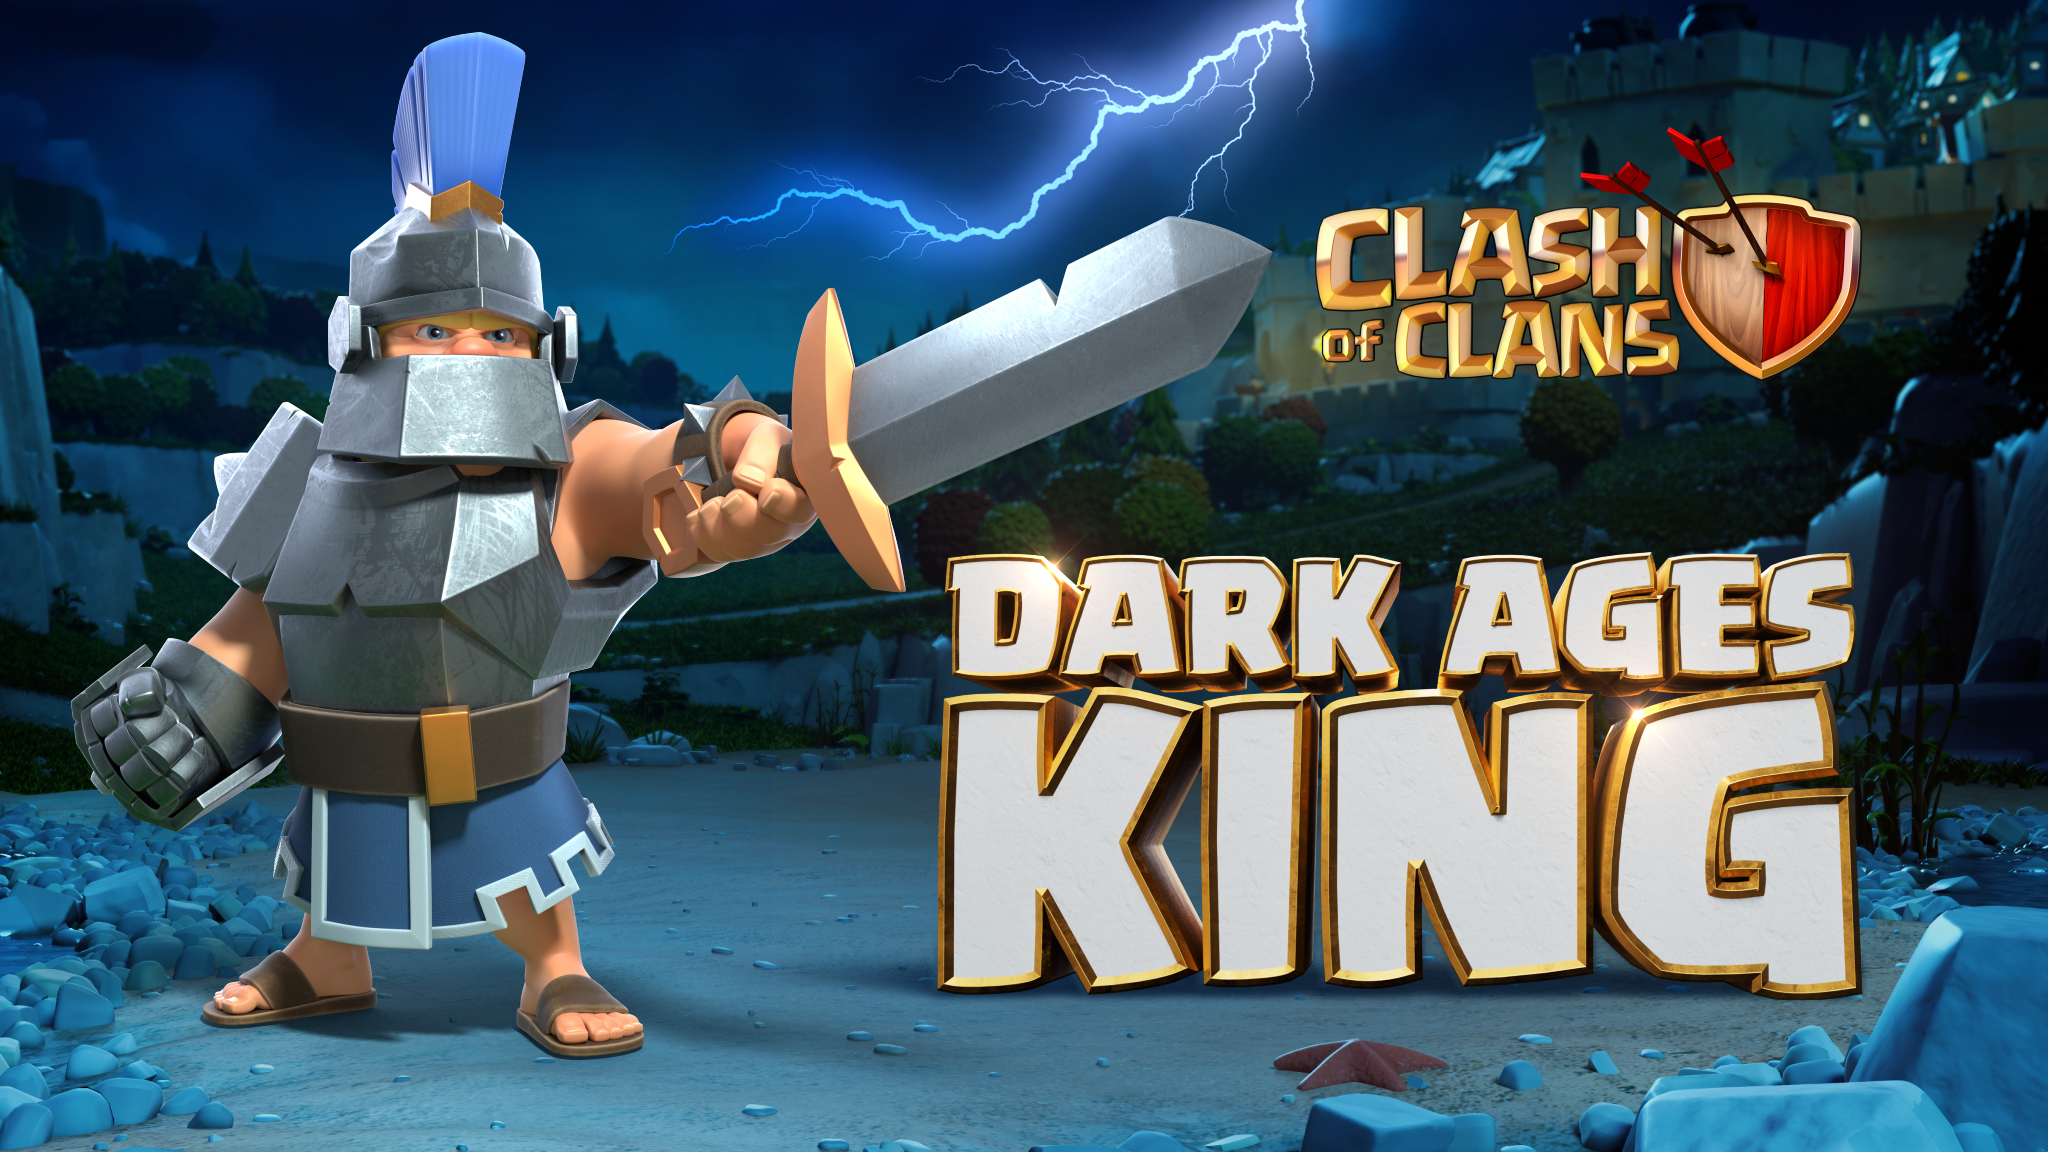 Easily Dark Age King Challenge #ClashofClans #Coc #CarbonFin